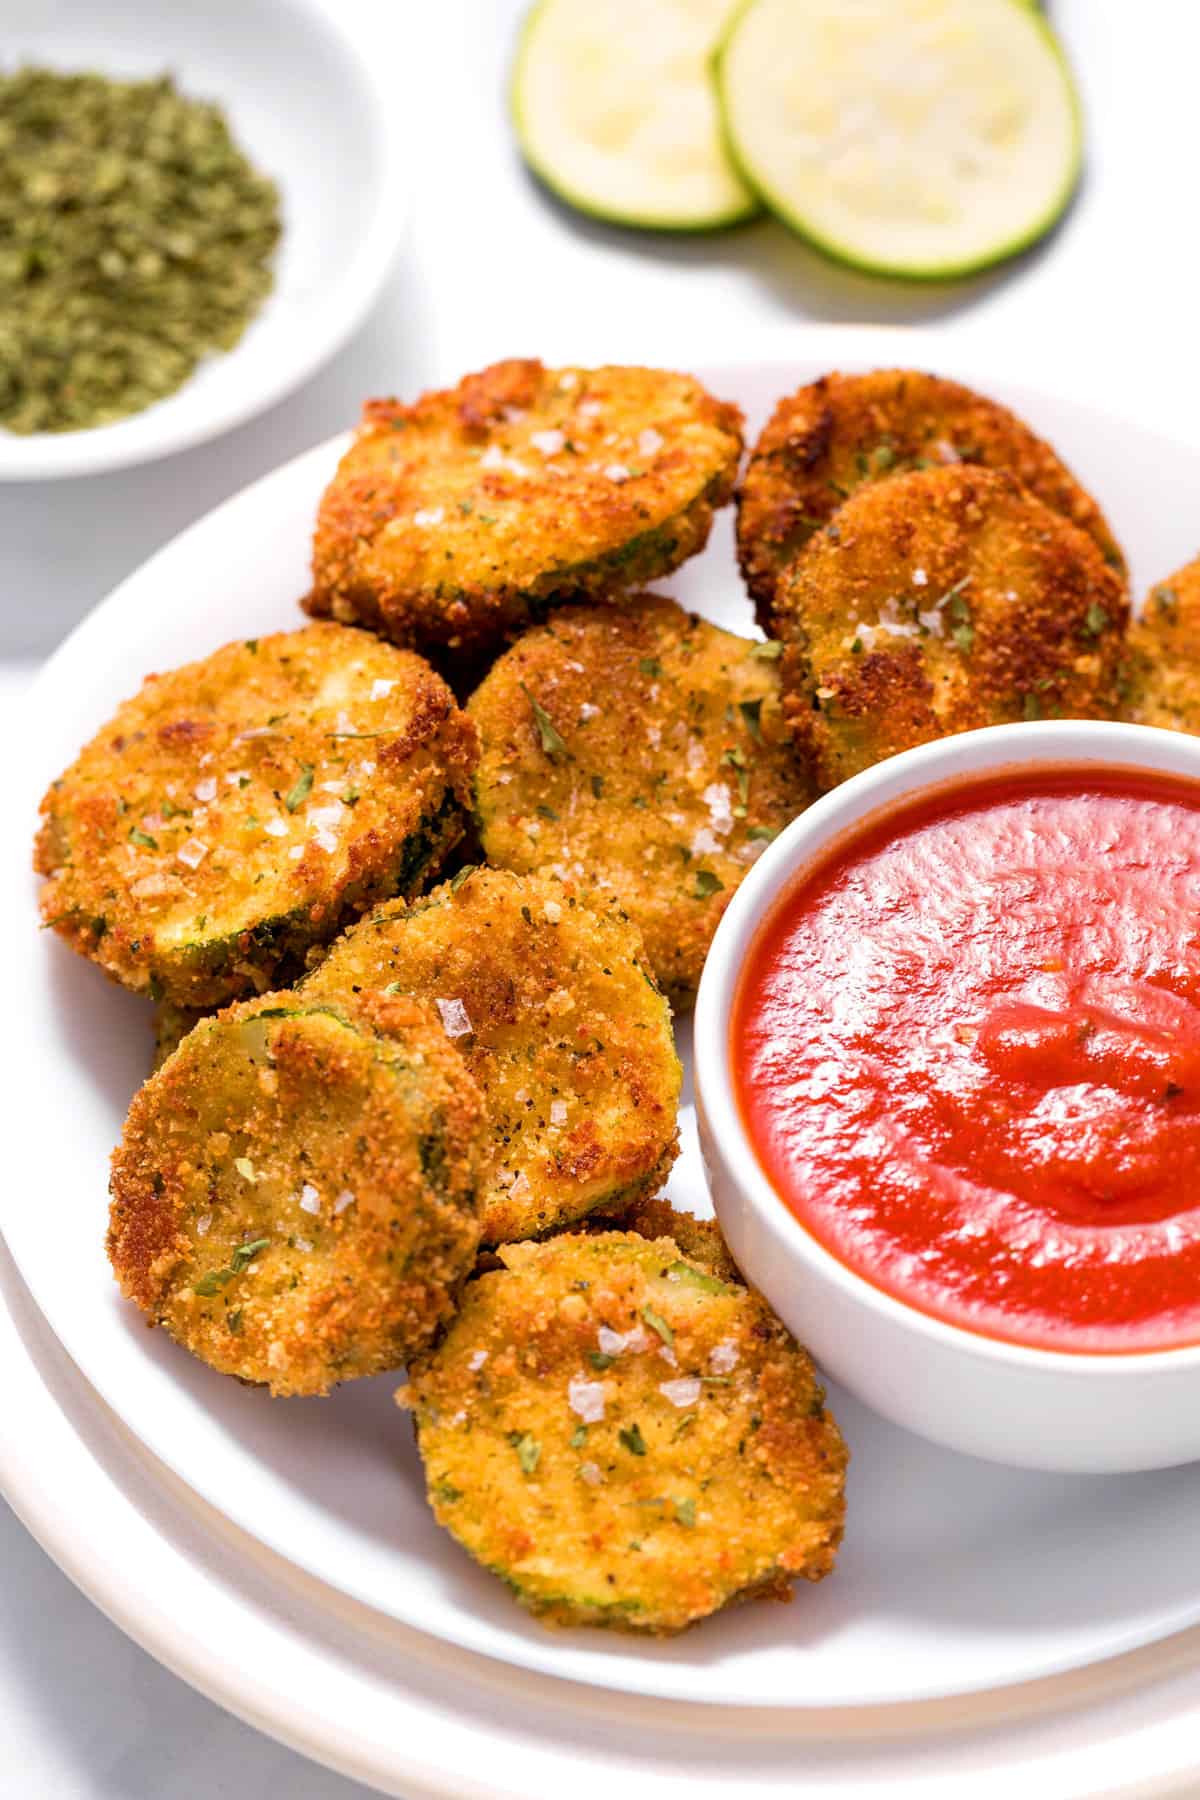 close up image of zucchini fries with a side of marinara sauce served on a white round plate